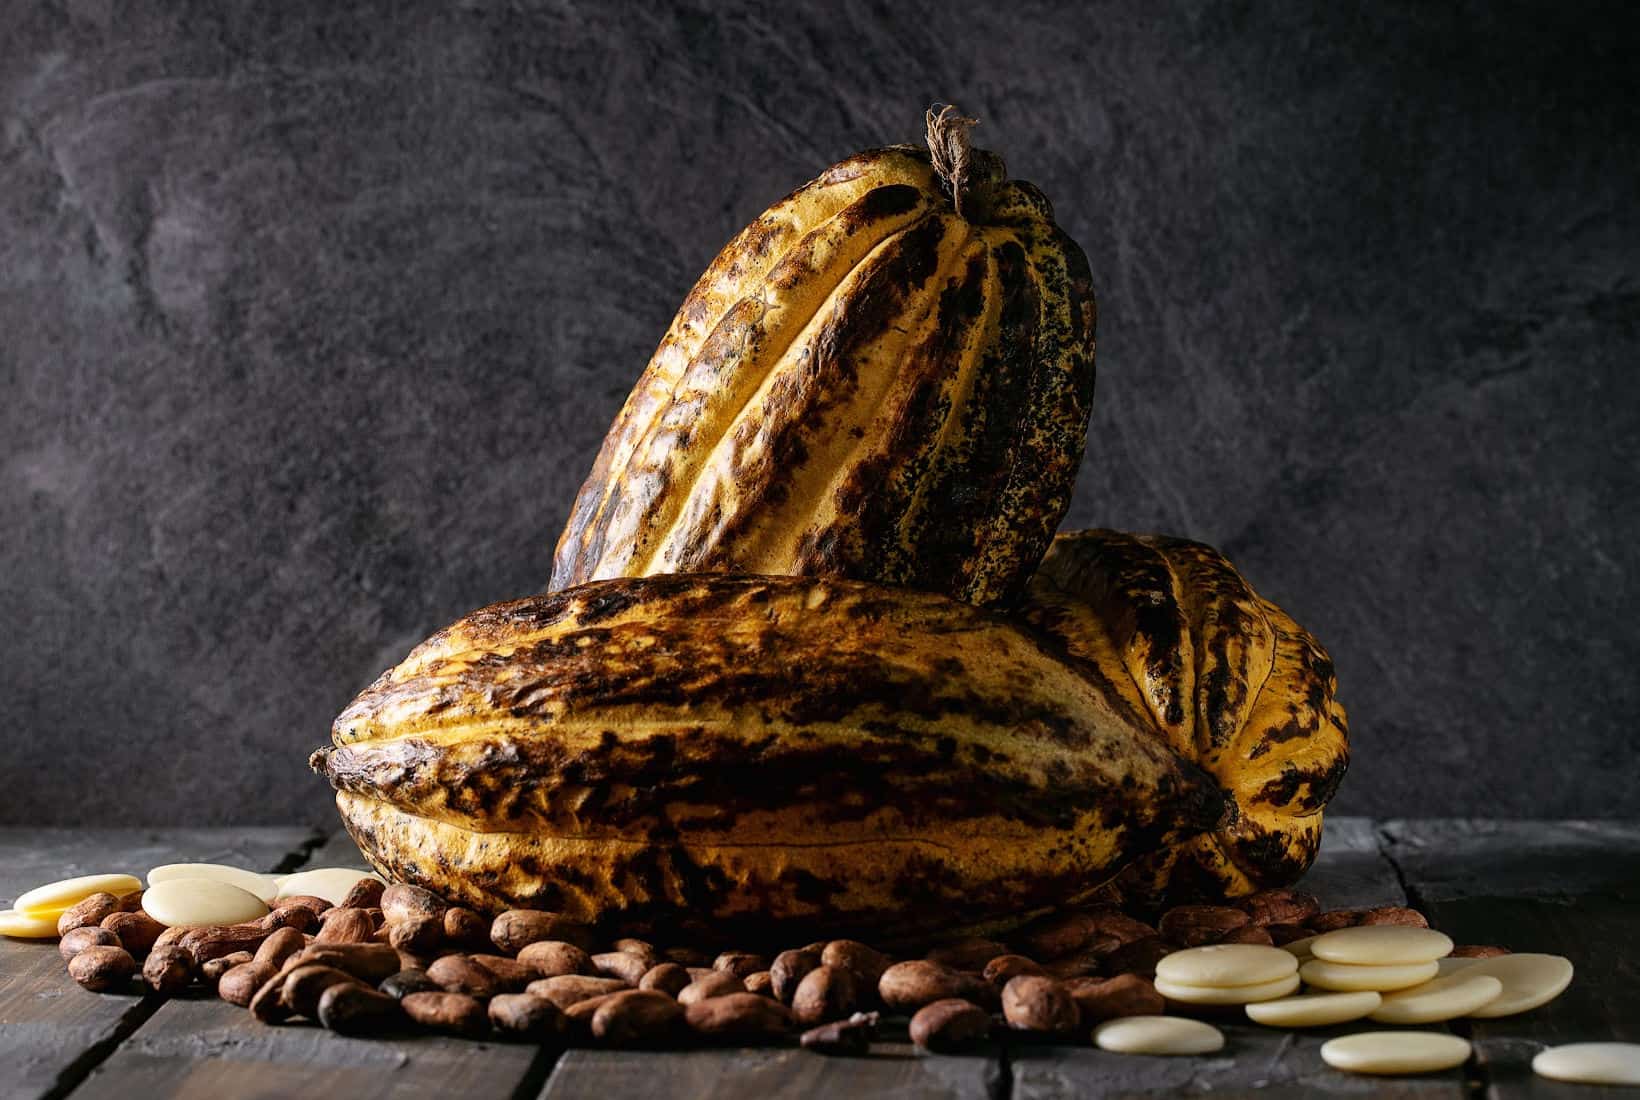 A group of cocoa beans on a dark background.